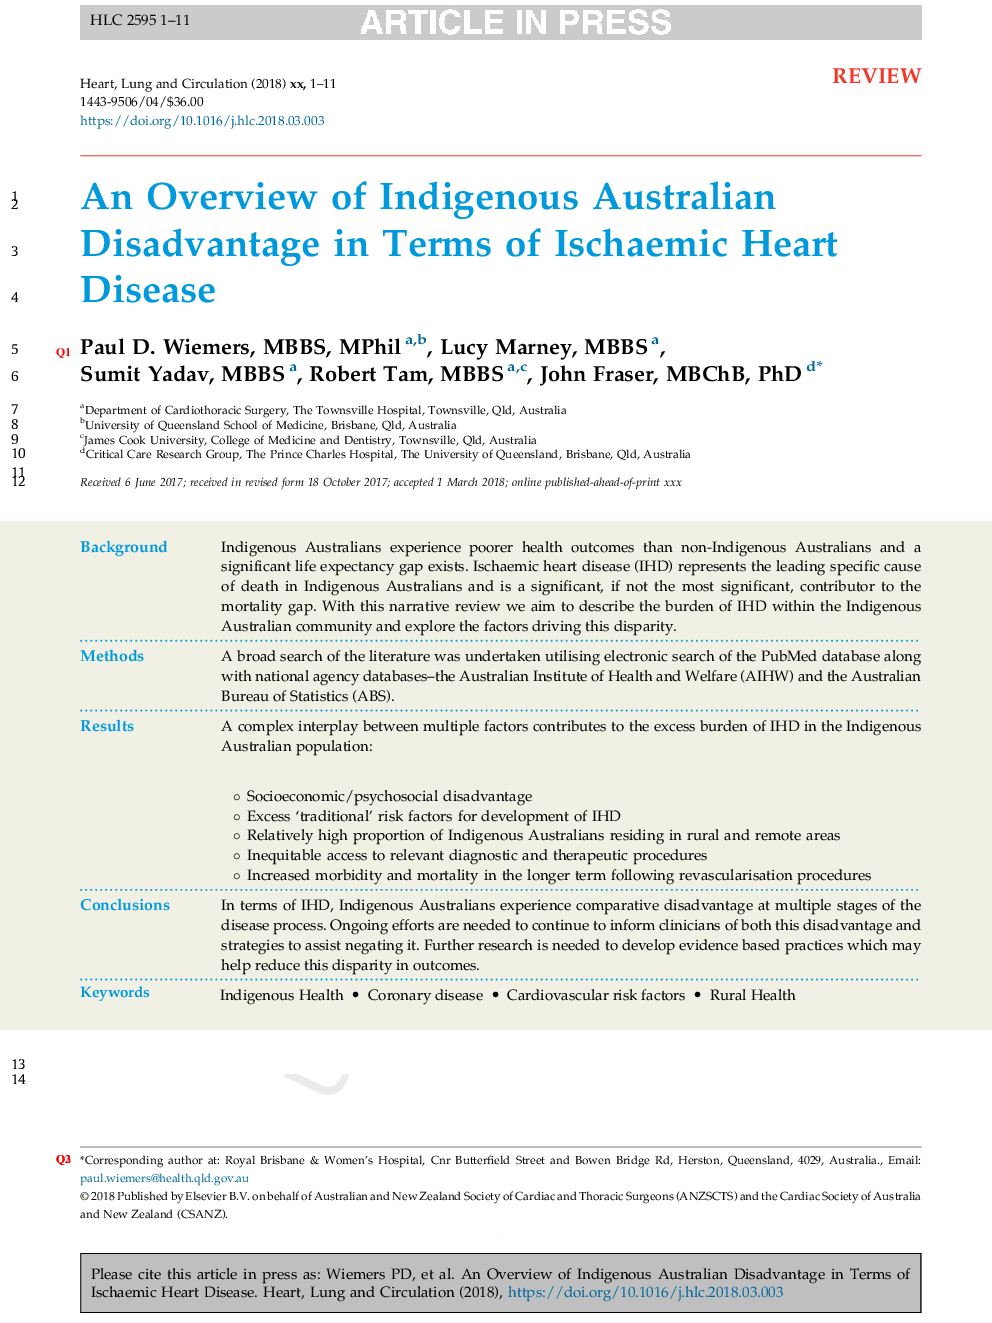 An Overview of Indigenous Australian Disadvantage in Terms of Ischaemic Heart Disease